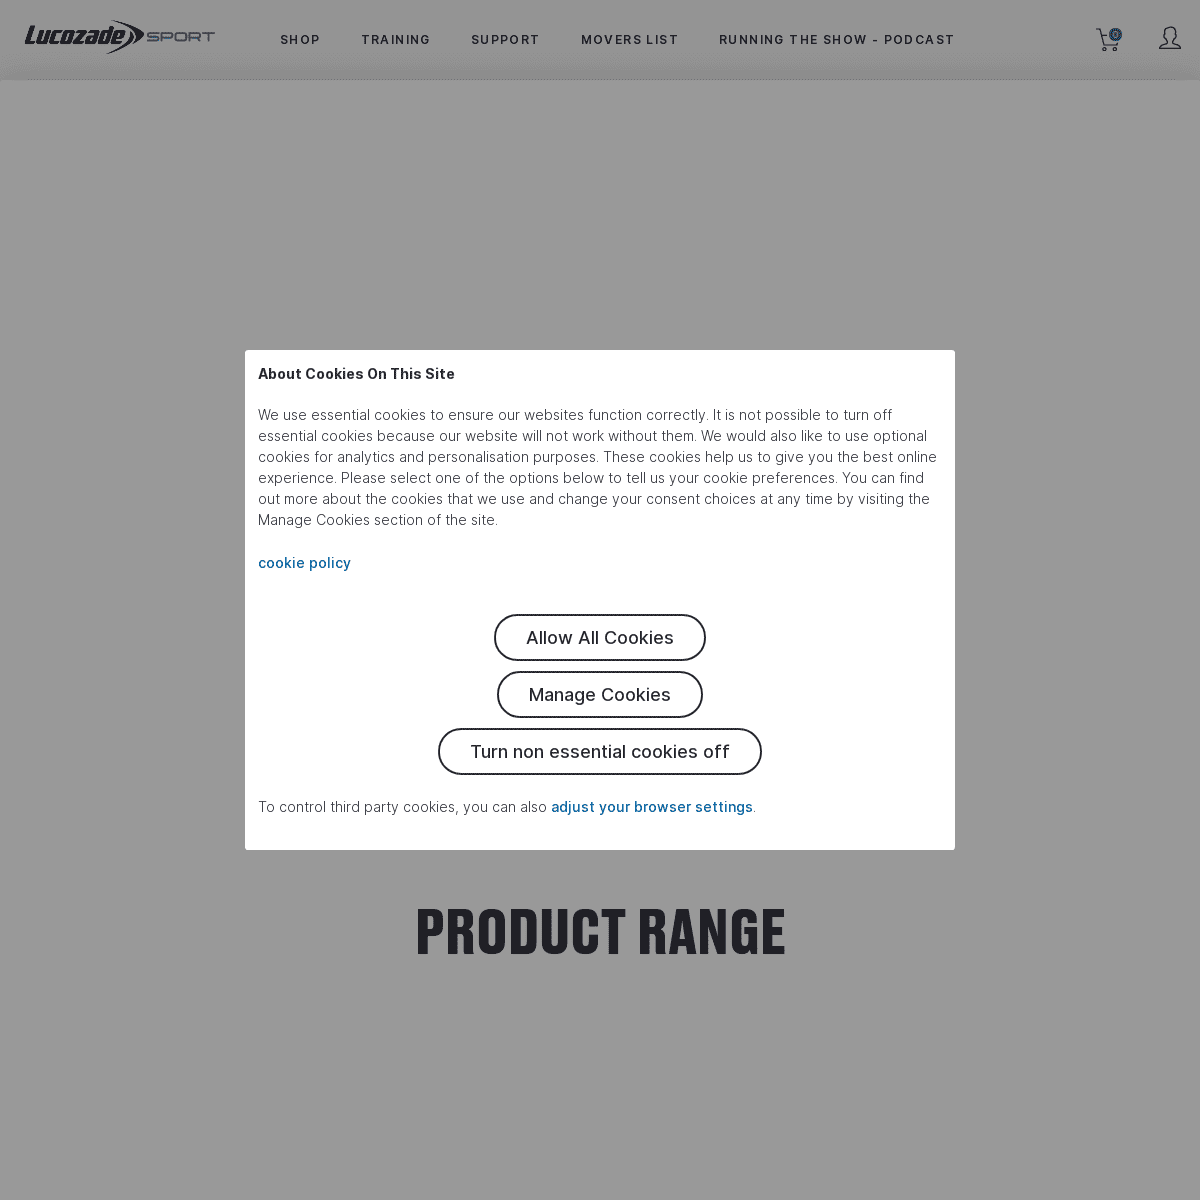 A complete backup of https://lucozadesport.com